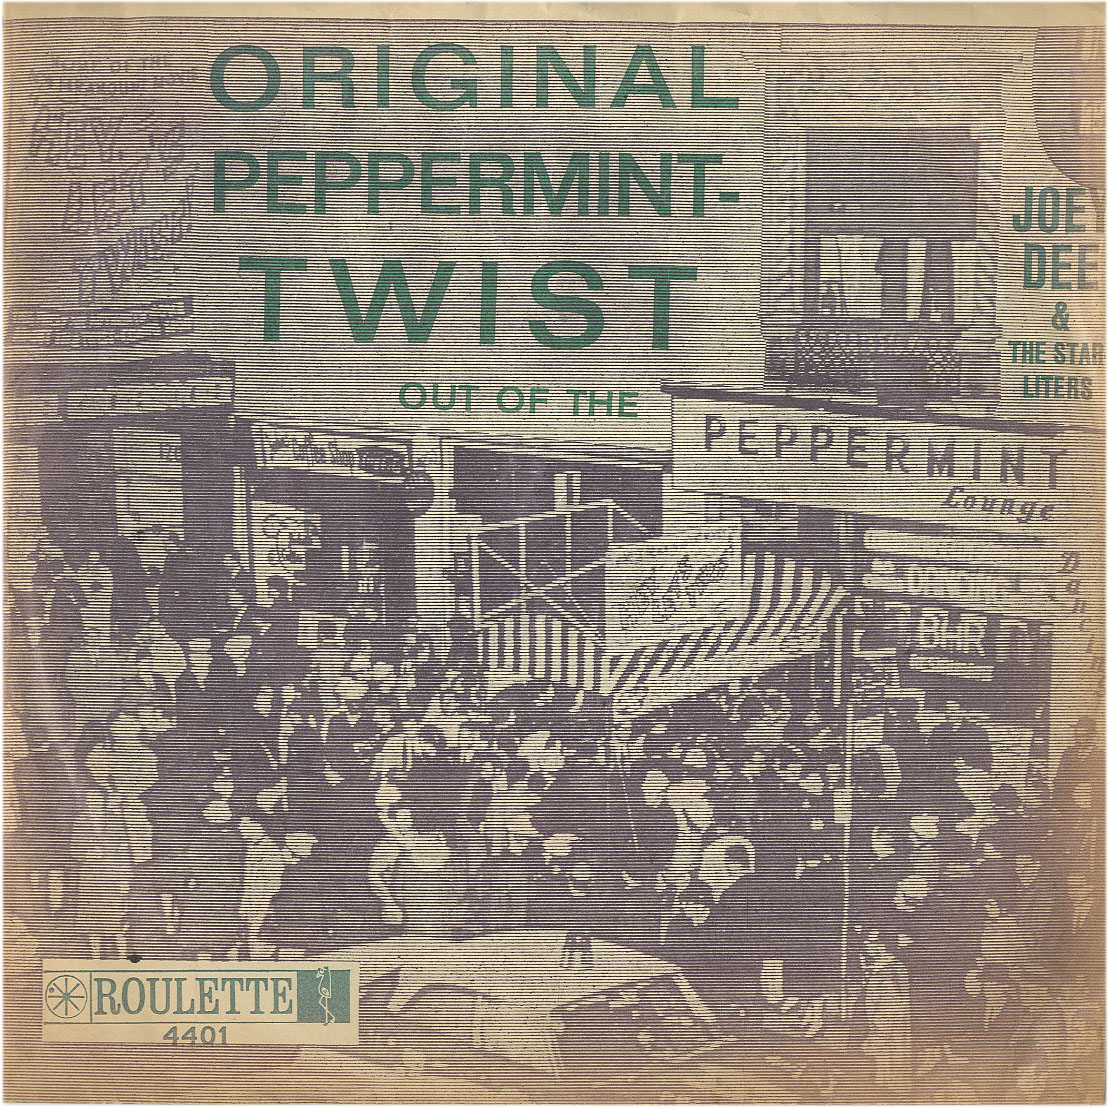 Albumcover Joey Dee and the Starlighters - Original Peppermint Twist Part I and Part II